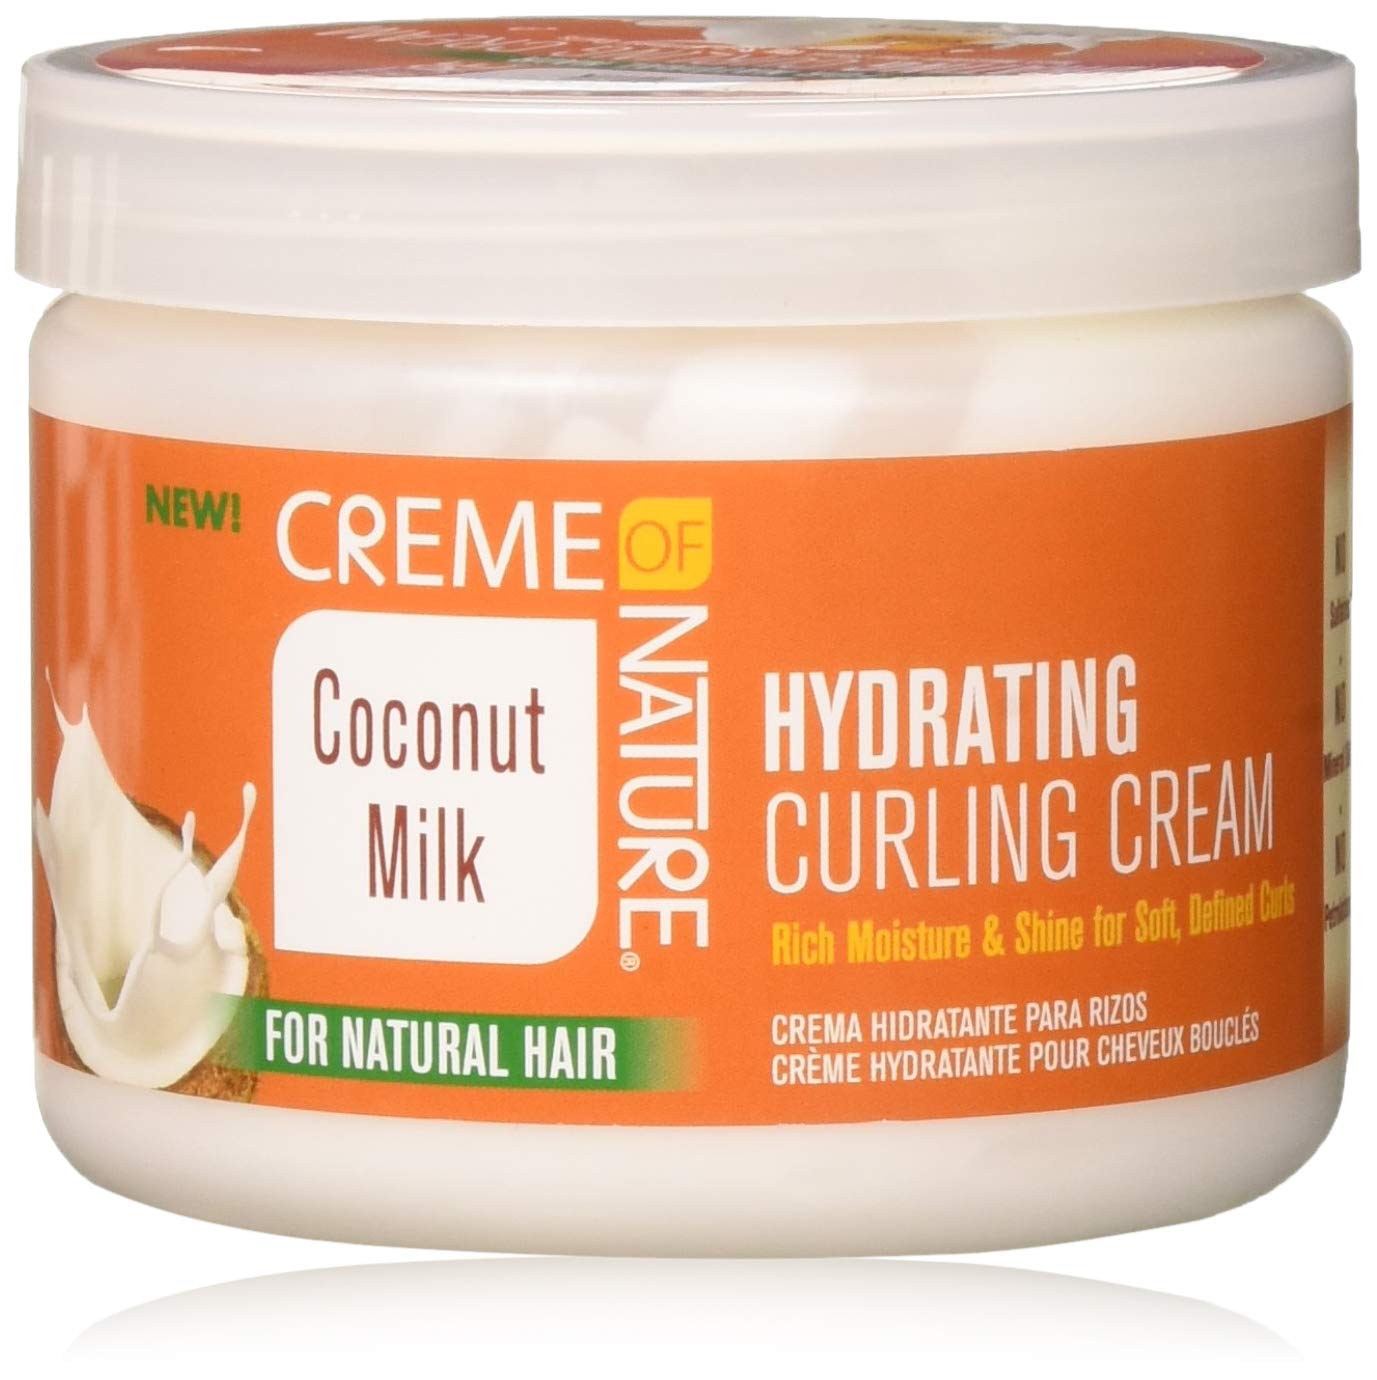 Creme of Nature Hydrating Curling Cream